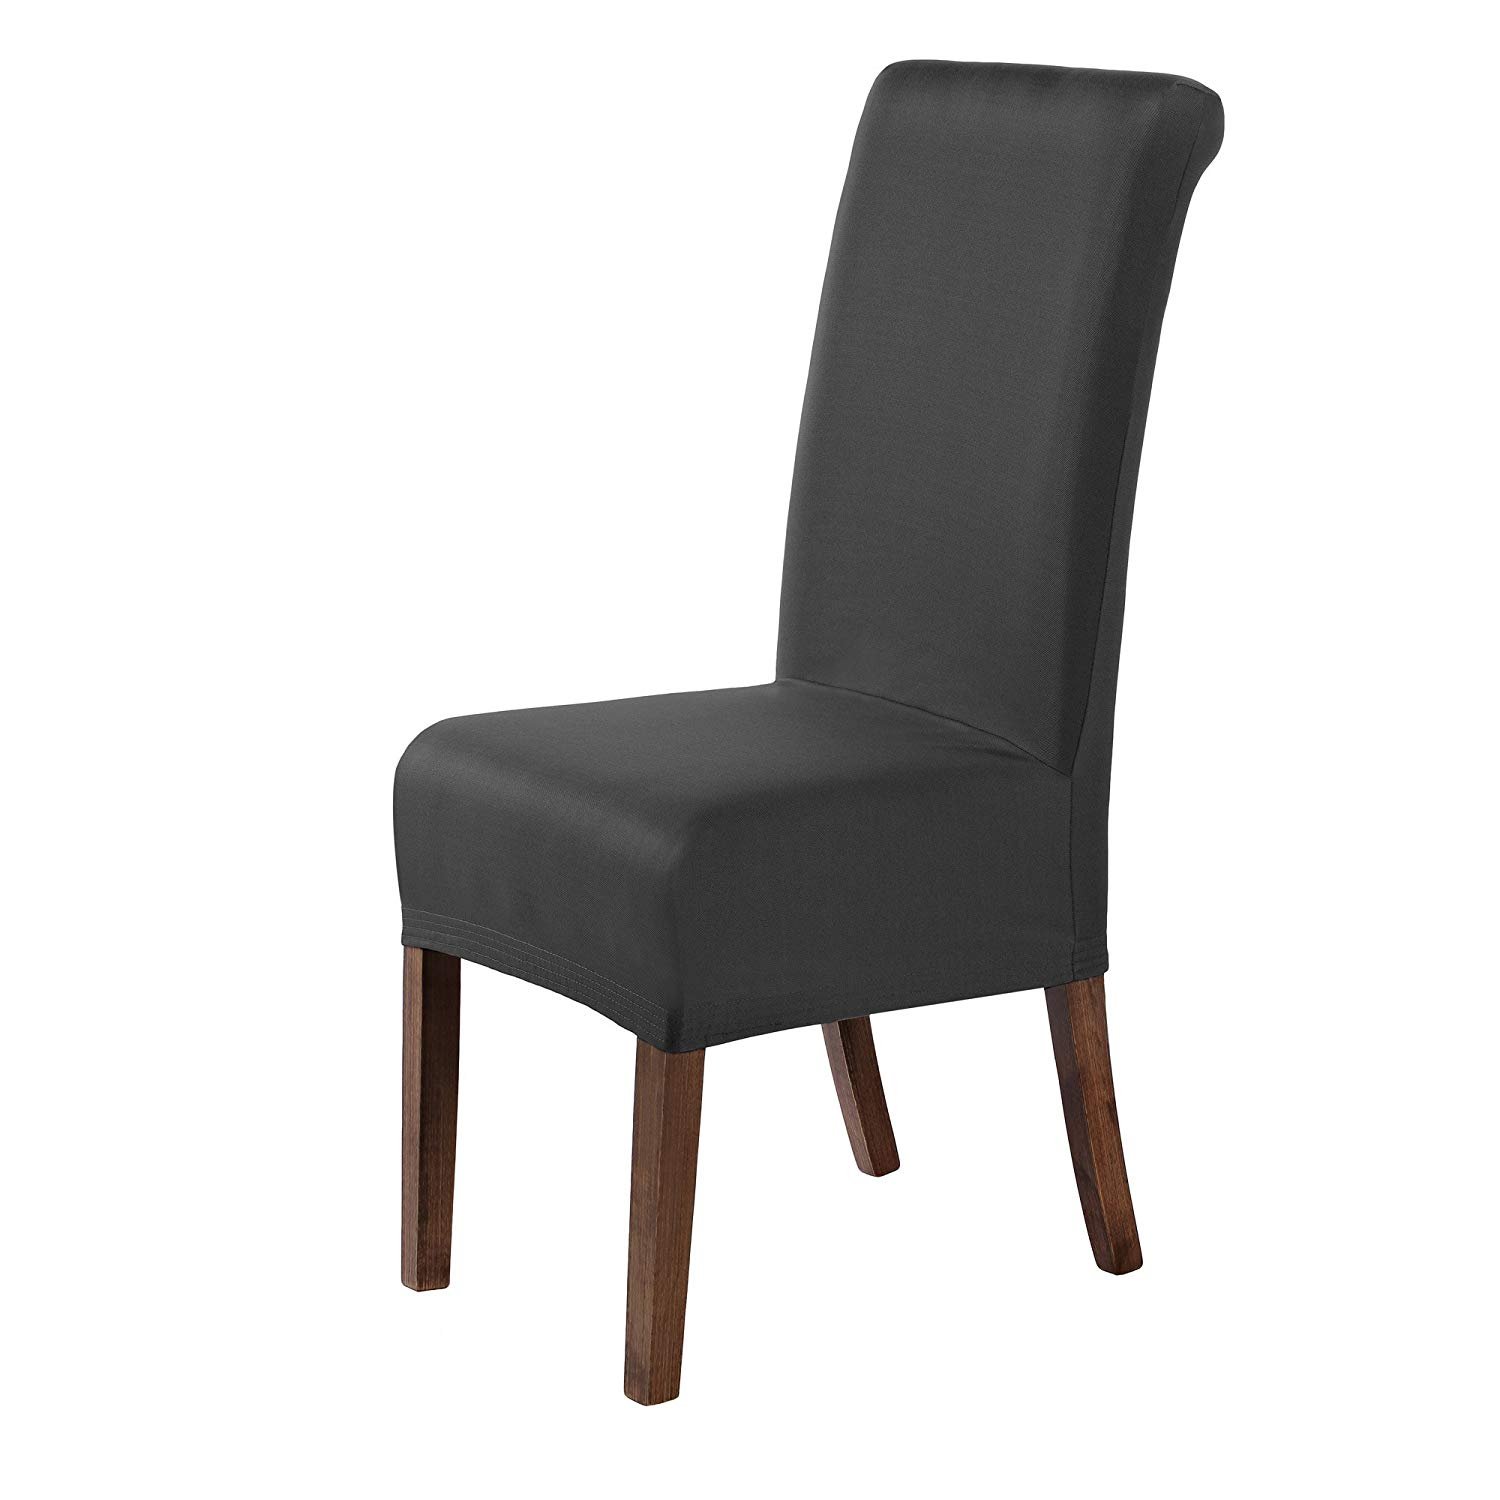 Elastic Dining Chair Slipcover Anthracite Elegant Chair Cover Microfibre Spandex Cover with Elastic Band SCHEFFLER-Home Stretch Chair Cover Jacquard Lea 